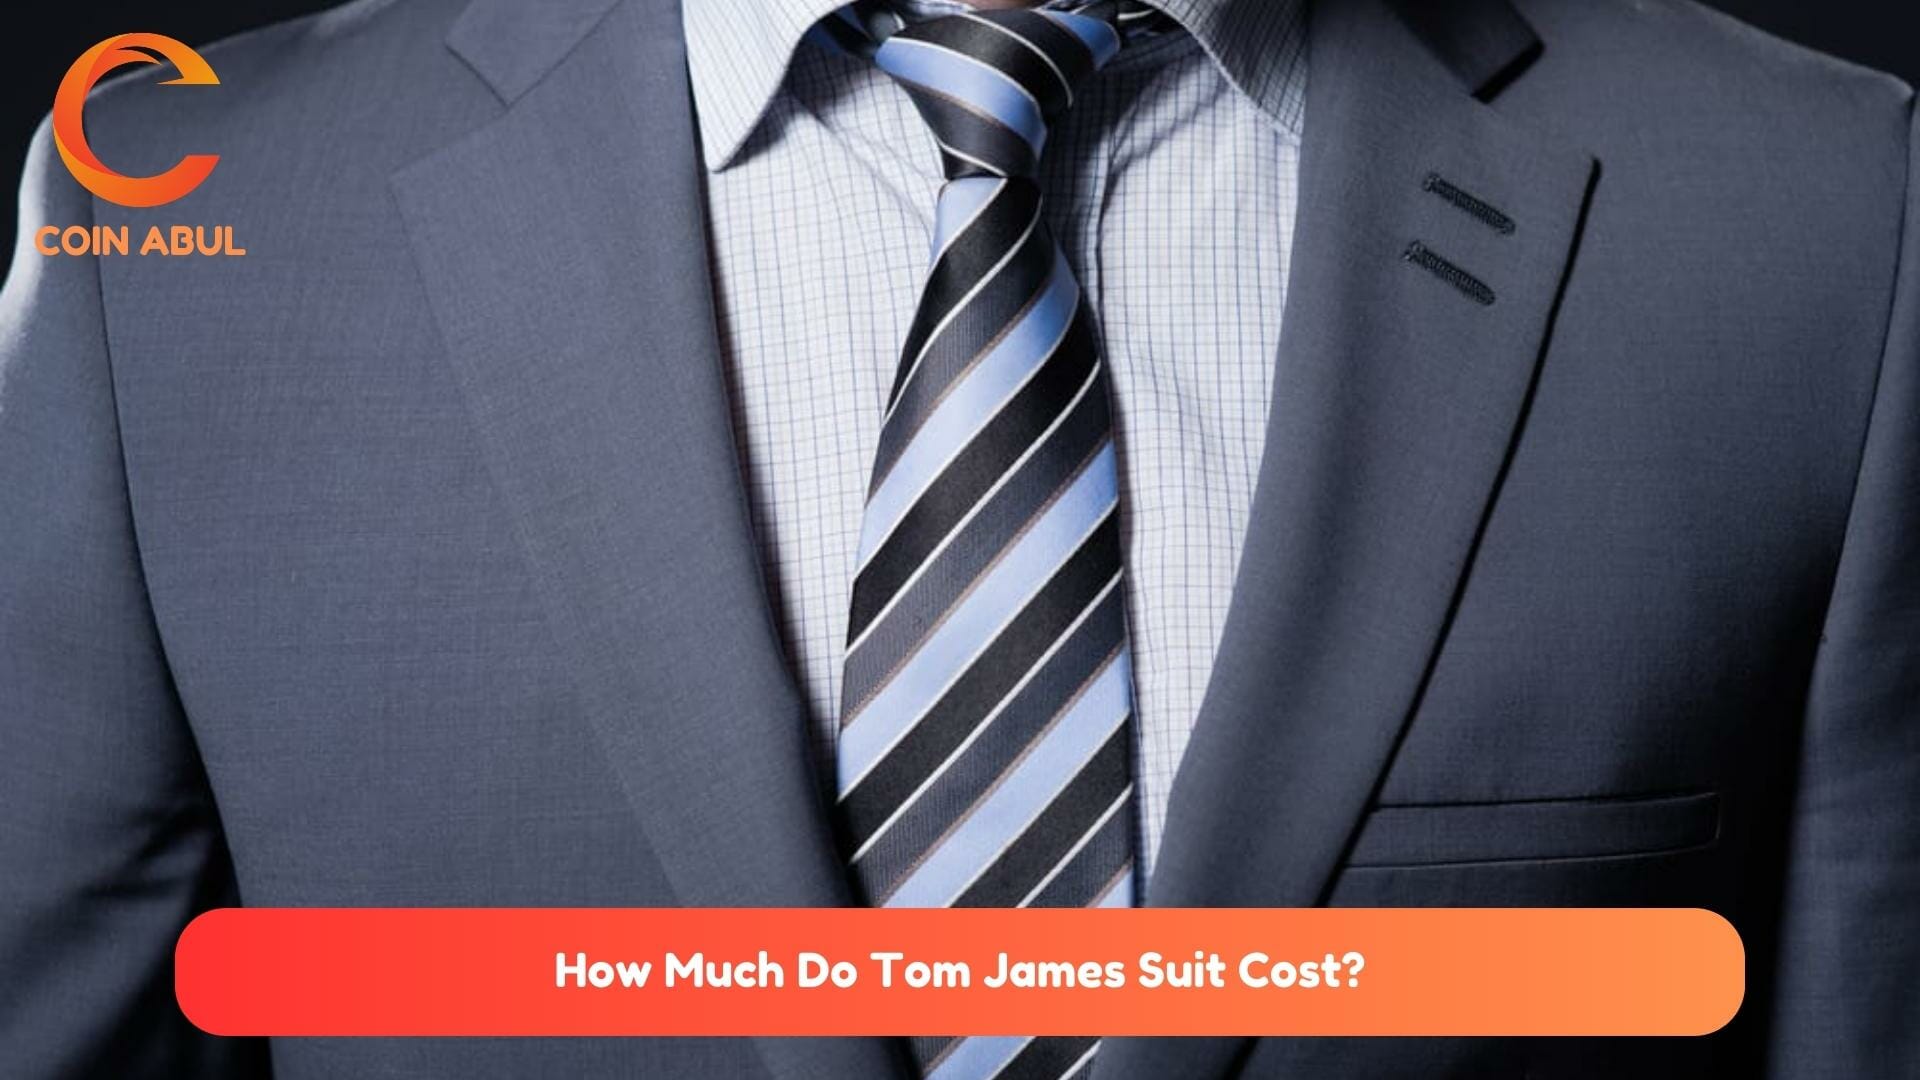 How Much Do Tom James Suit Cost